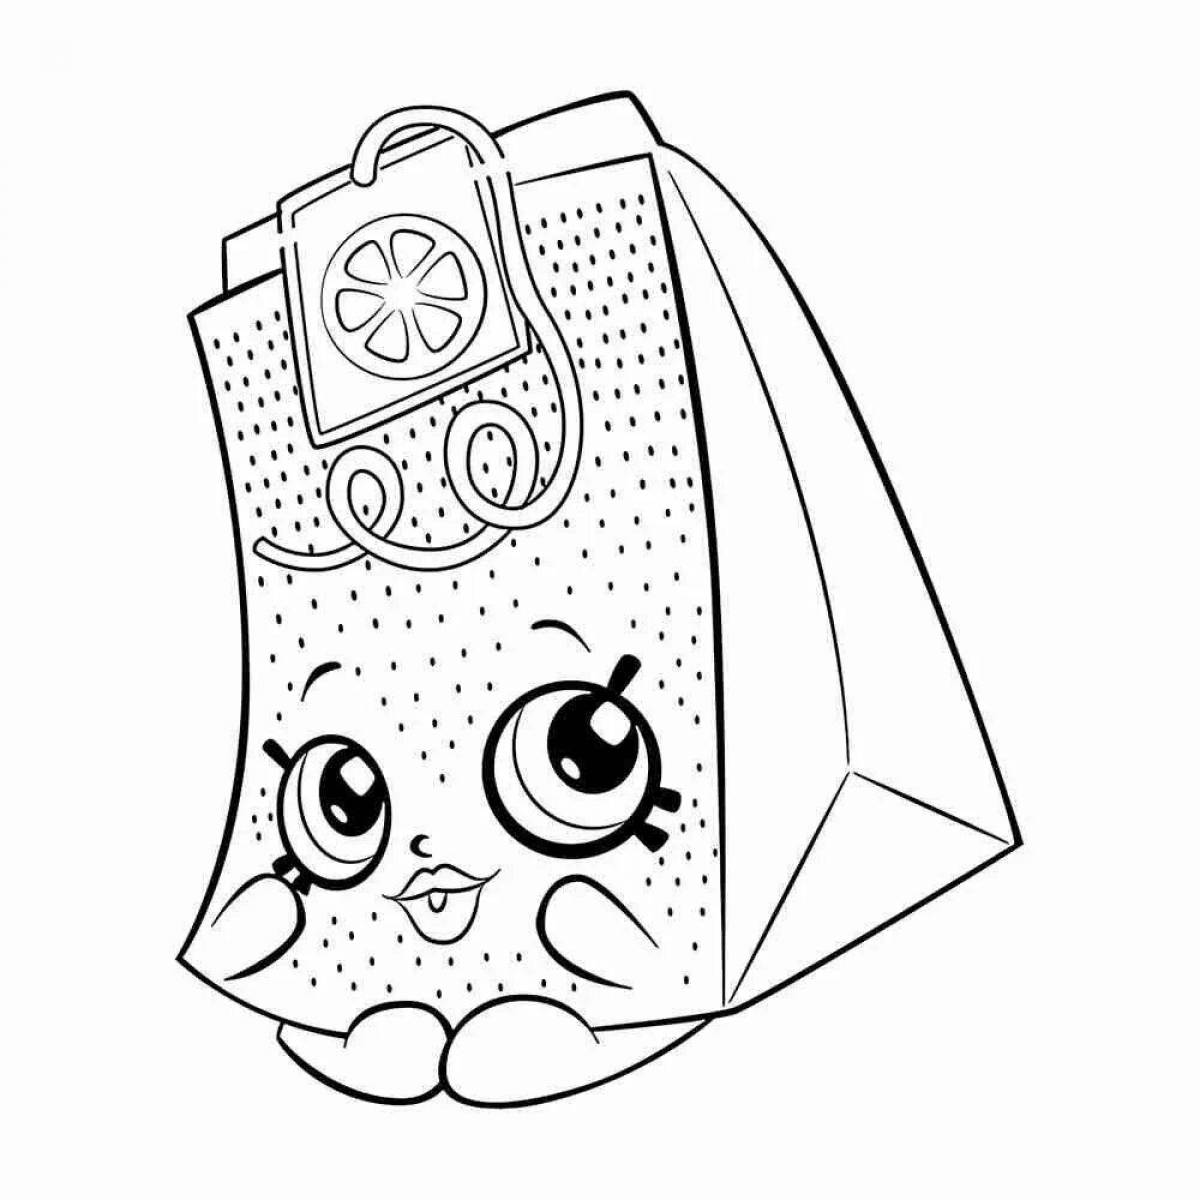 Amazing sachet coloring page